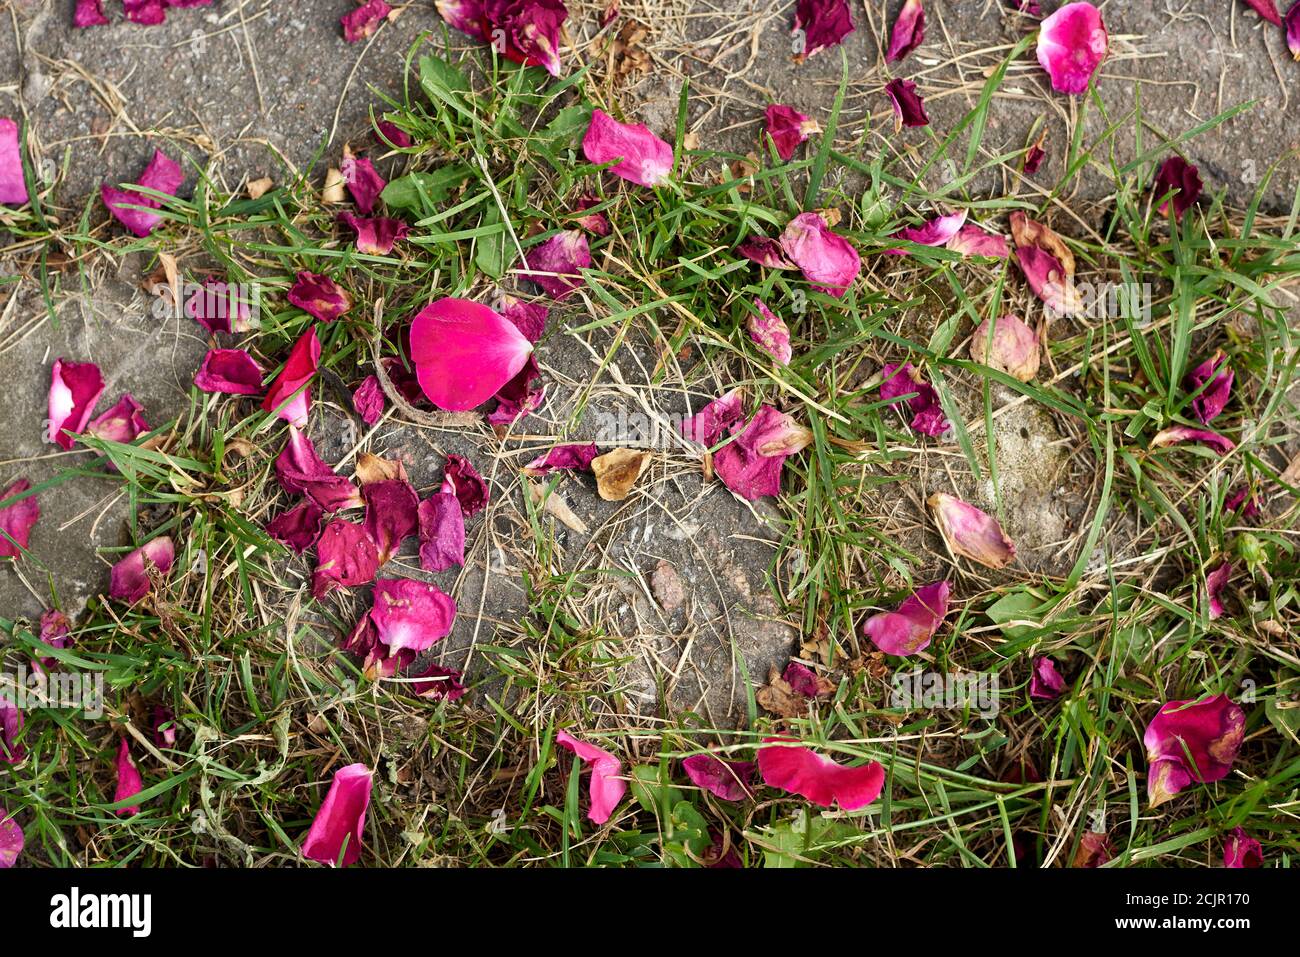 The petals of a bright pink rose fell on grass and ground Stock Photo -  Alamy